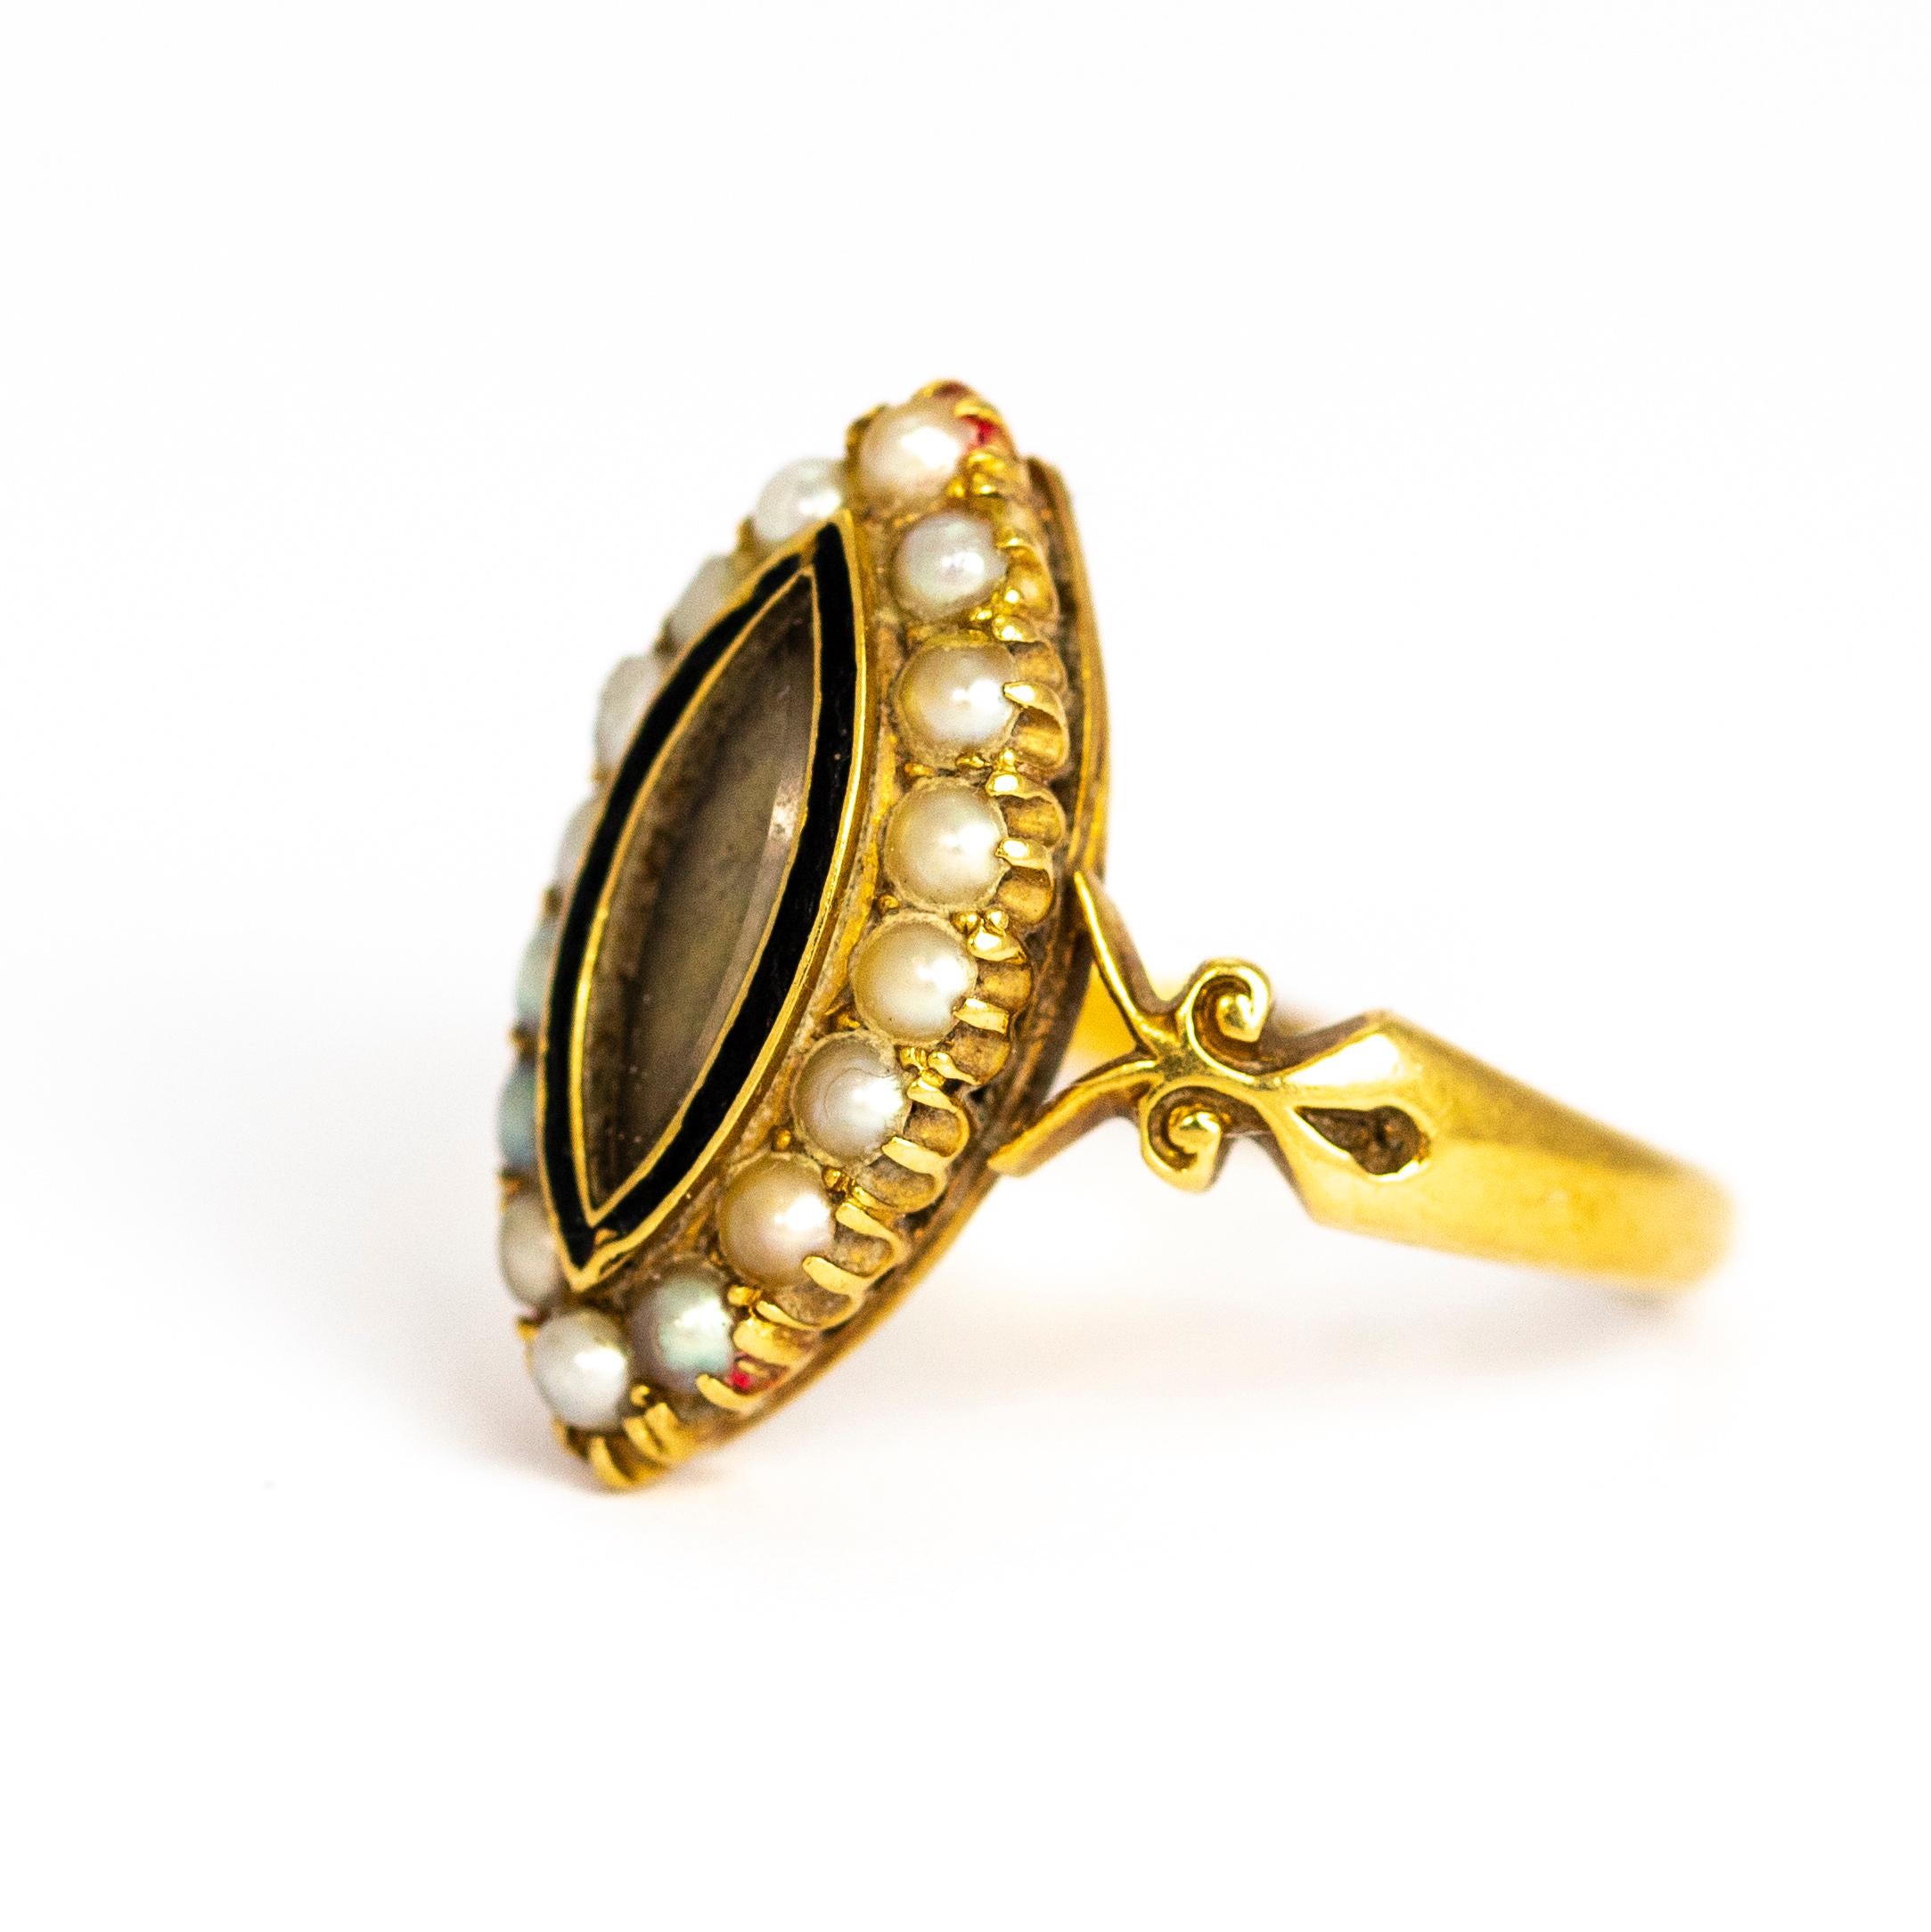 This spectacular antique mourning ring dates back to the late Victorian era. The centre of it's navette front is set with a glazed locket, bordered with black enamel and gold. The perimeter is lined with stunning white seed pearls. The shoulders